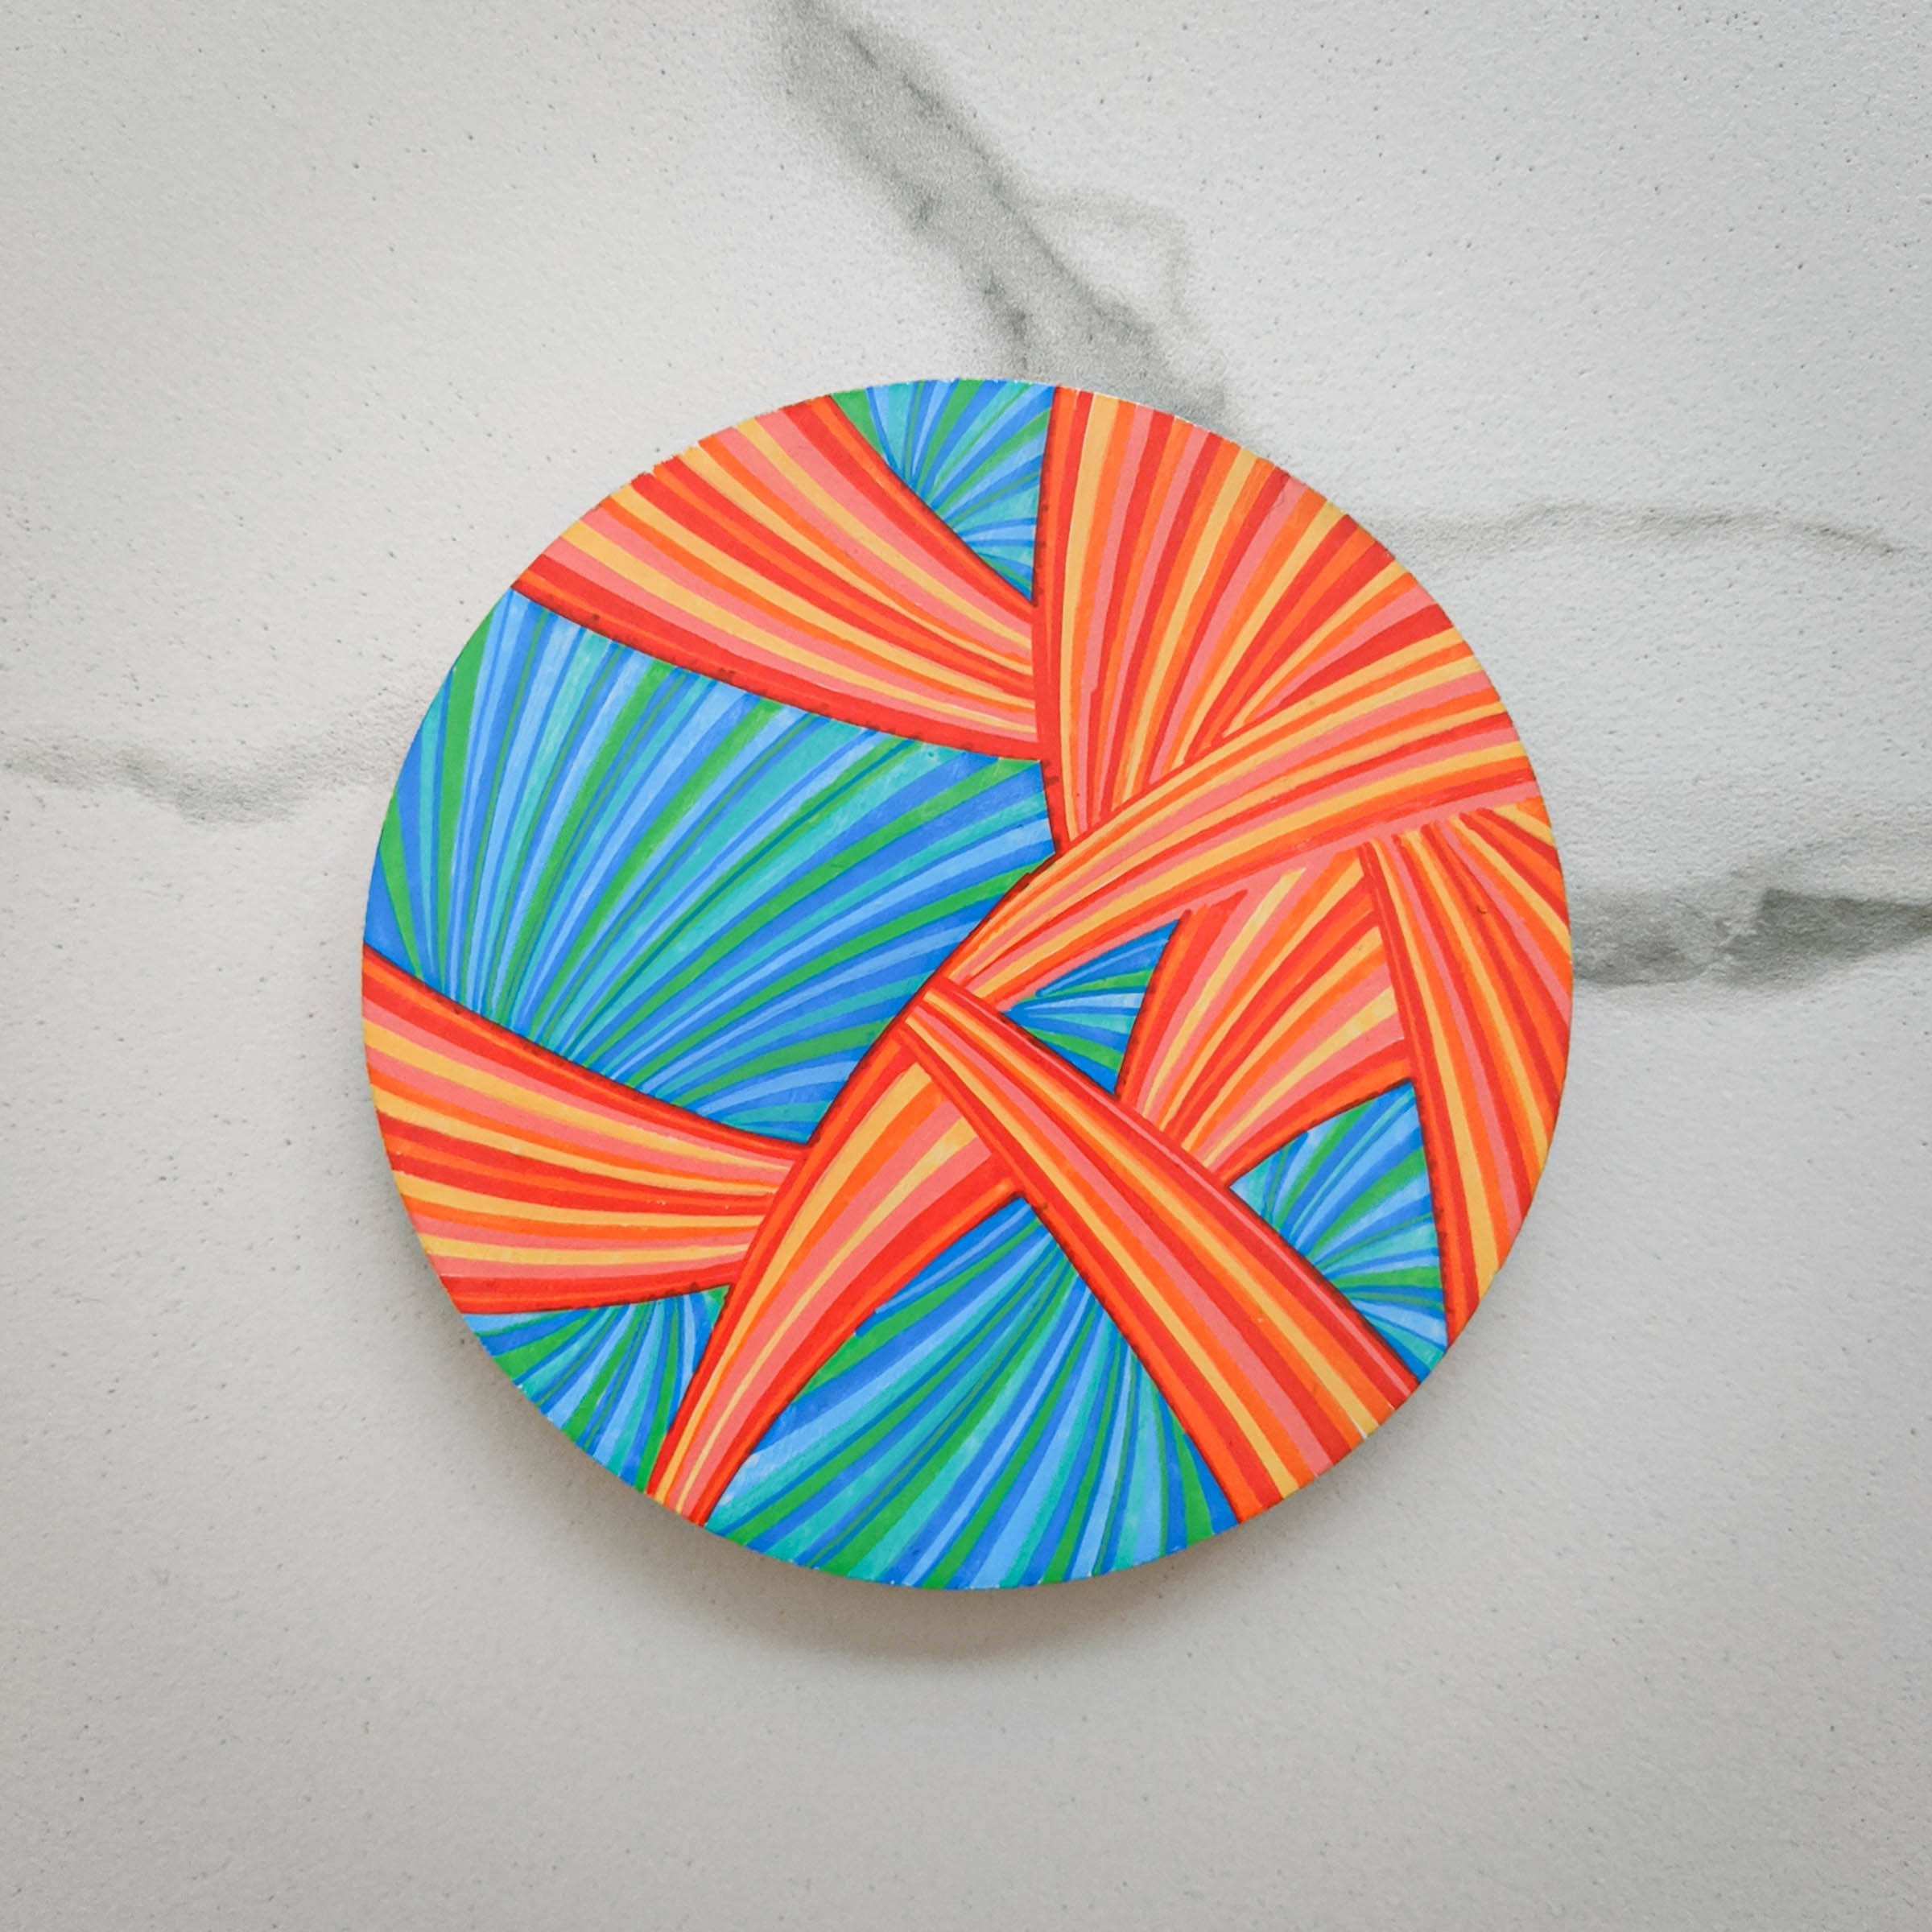 fish tail, saison de poisson, fish season, season of fish, line art, horizons, lines, red, blue, saffron, teal, khaosphilos, crimson, turquoise, crimson and turquoise, hand painted, wearable art, display art, original art, contemporary art, contemporary artist, naina redhu, naina.co, 3 inches diameter, 3 inch, circular canvas, acrylics on wood, wooden brooch, brooch, art brooch, wearable art brooch, wearable art jewellery, canvas display, magnet clasp, acrylic painting, khaos philos, chaos lover